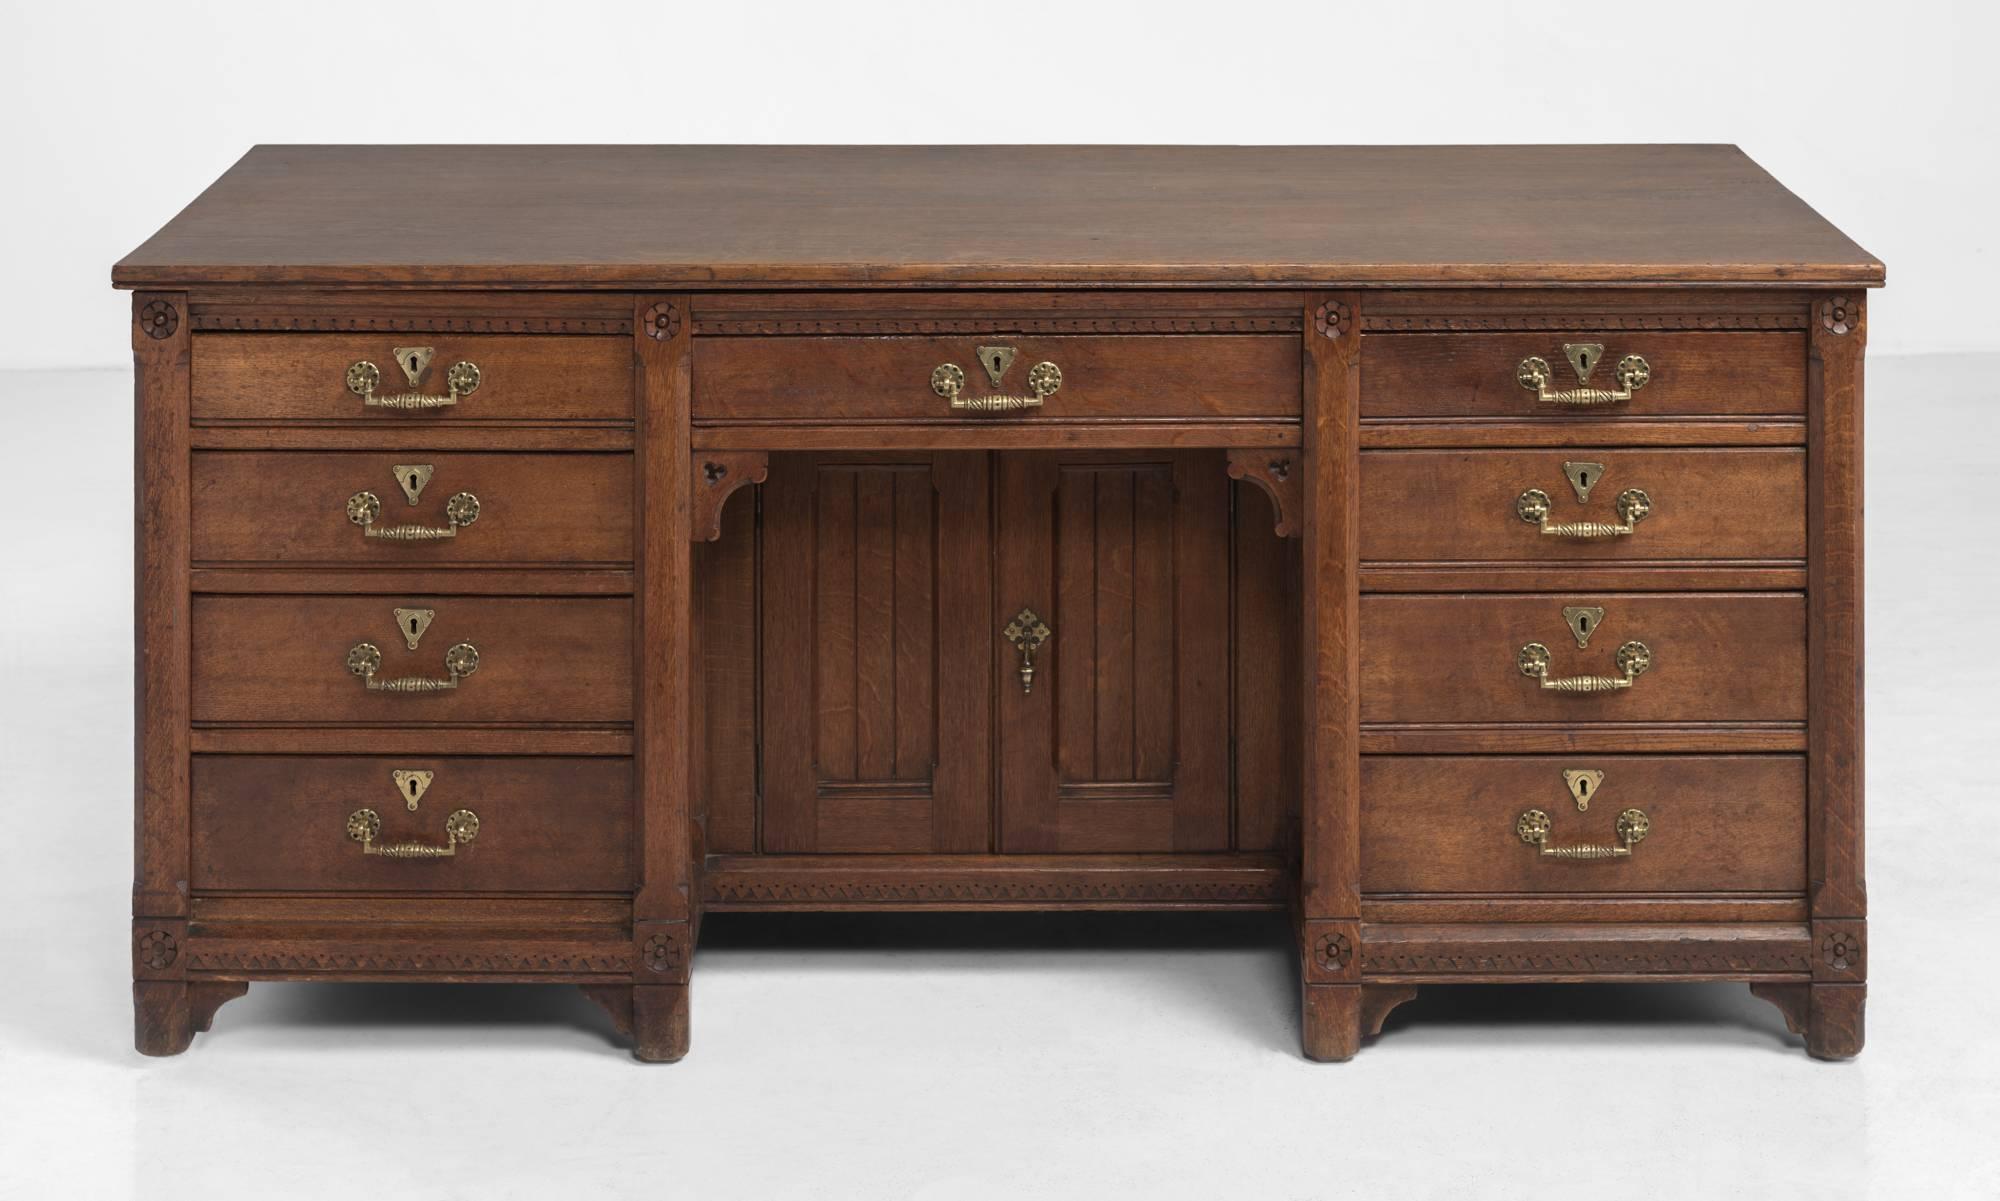 Handsome Oak Writing Desk, circa 1870

Sturdy construction with brass hardware and ornate detailing throughout. Made by Holland & Sons, London.